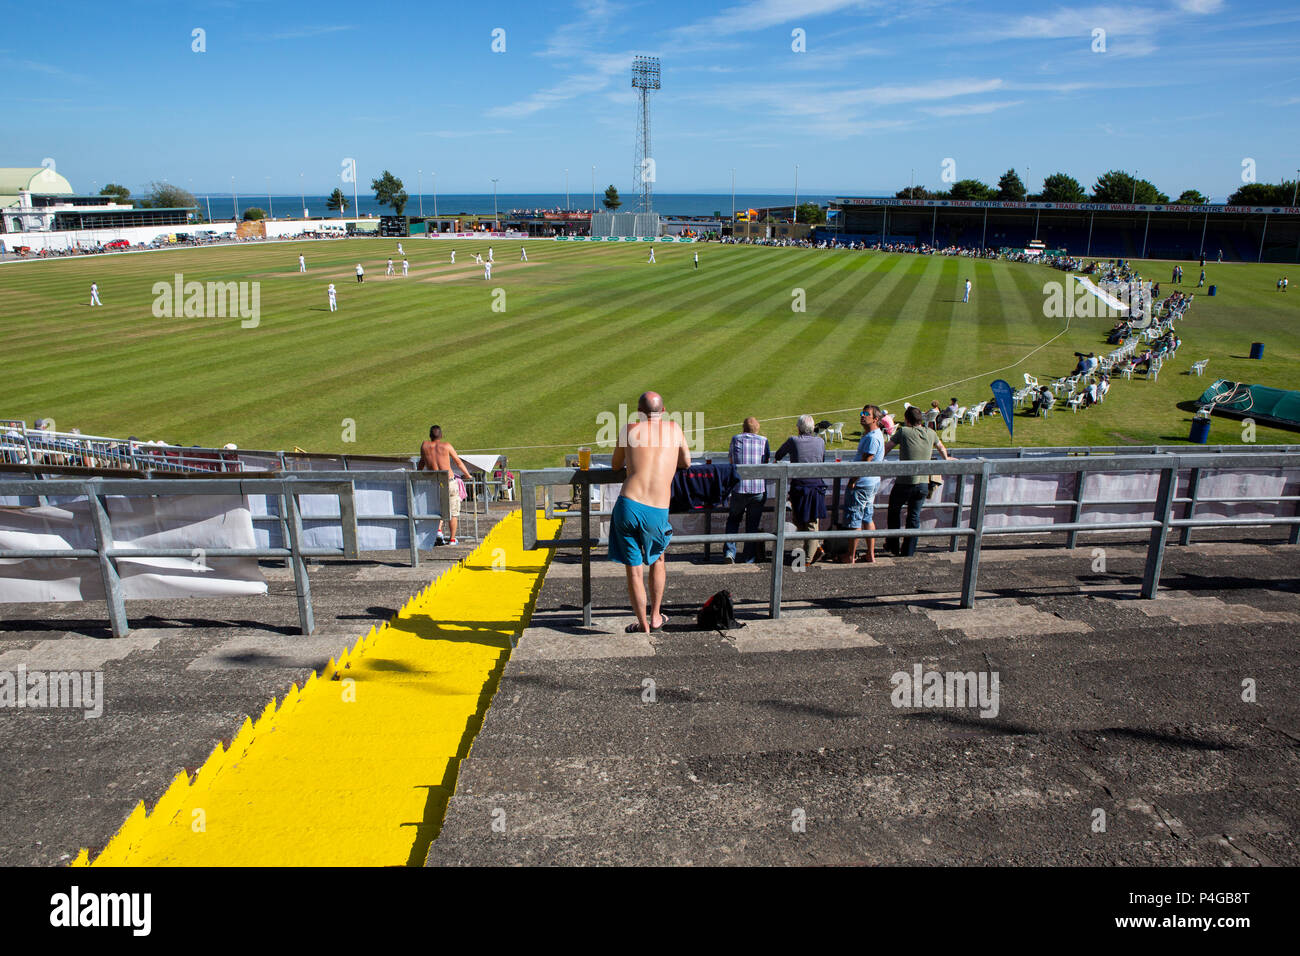 A spectator watches a first class county cricket match on a scorching hot day at Swansea Stock Photo